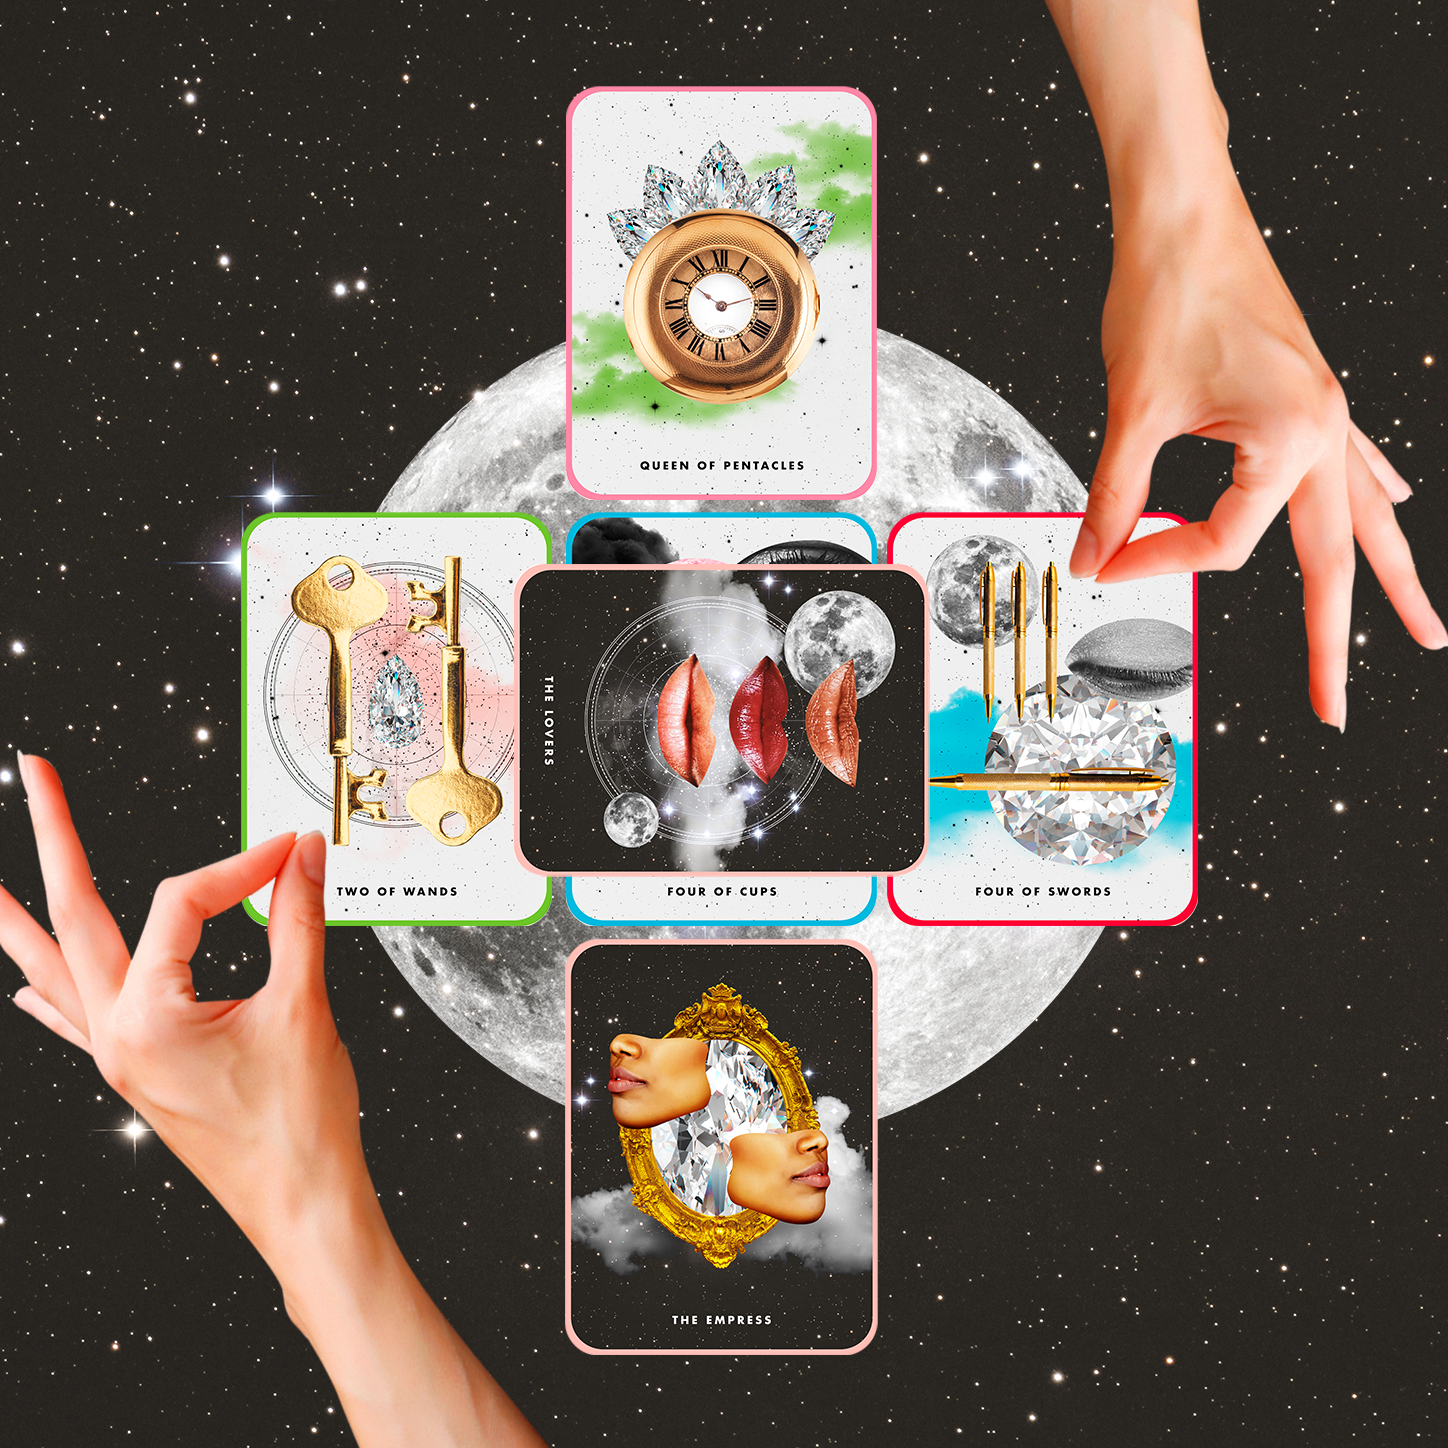 Your Weekly Tarot Card Reading Is Telling You a Secret